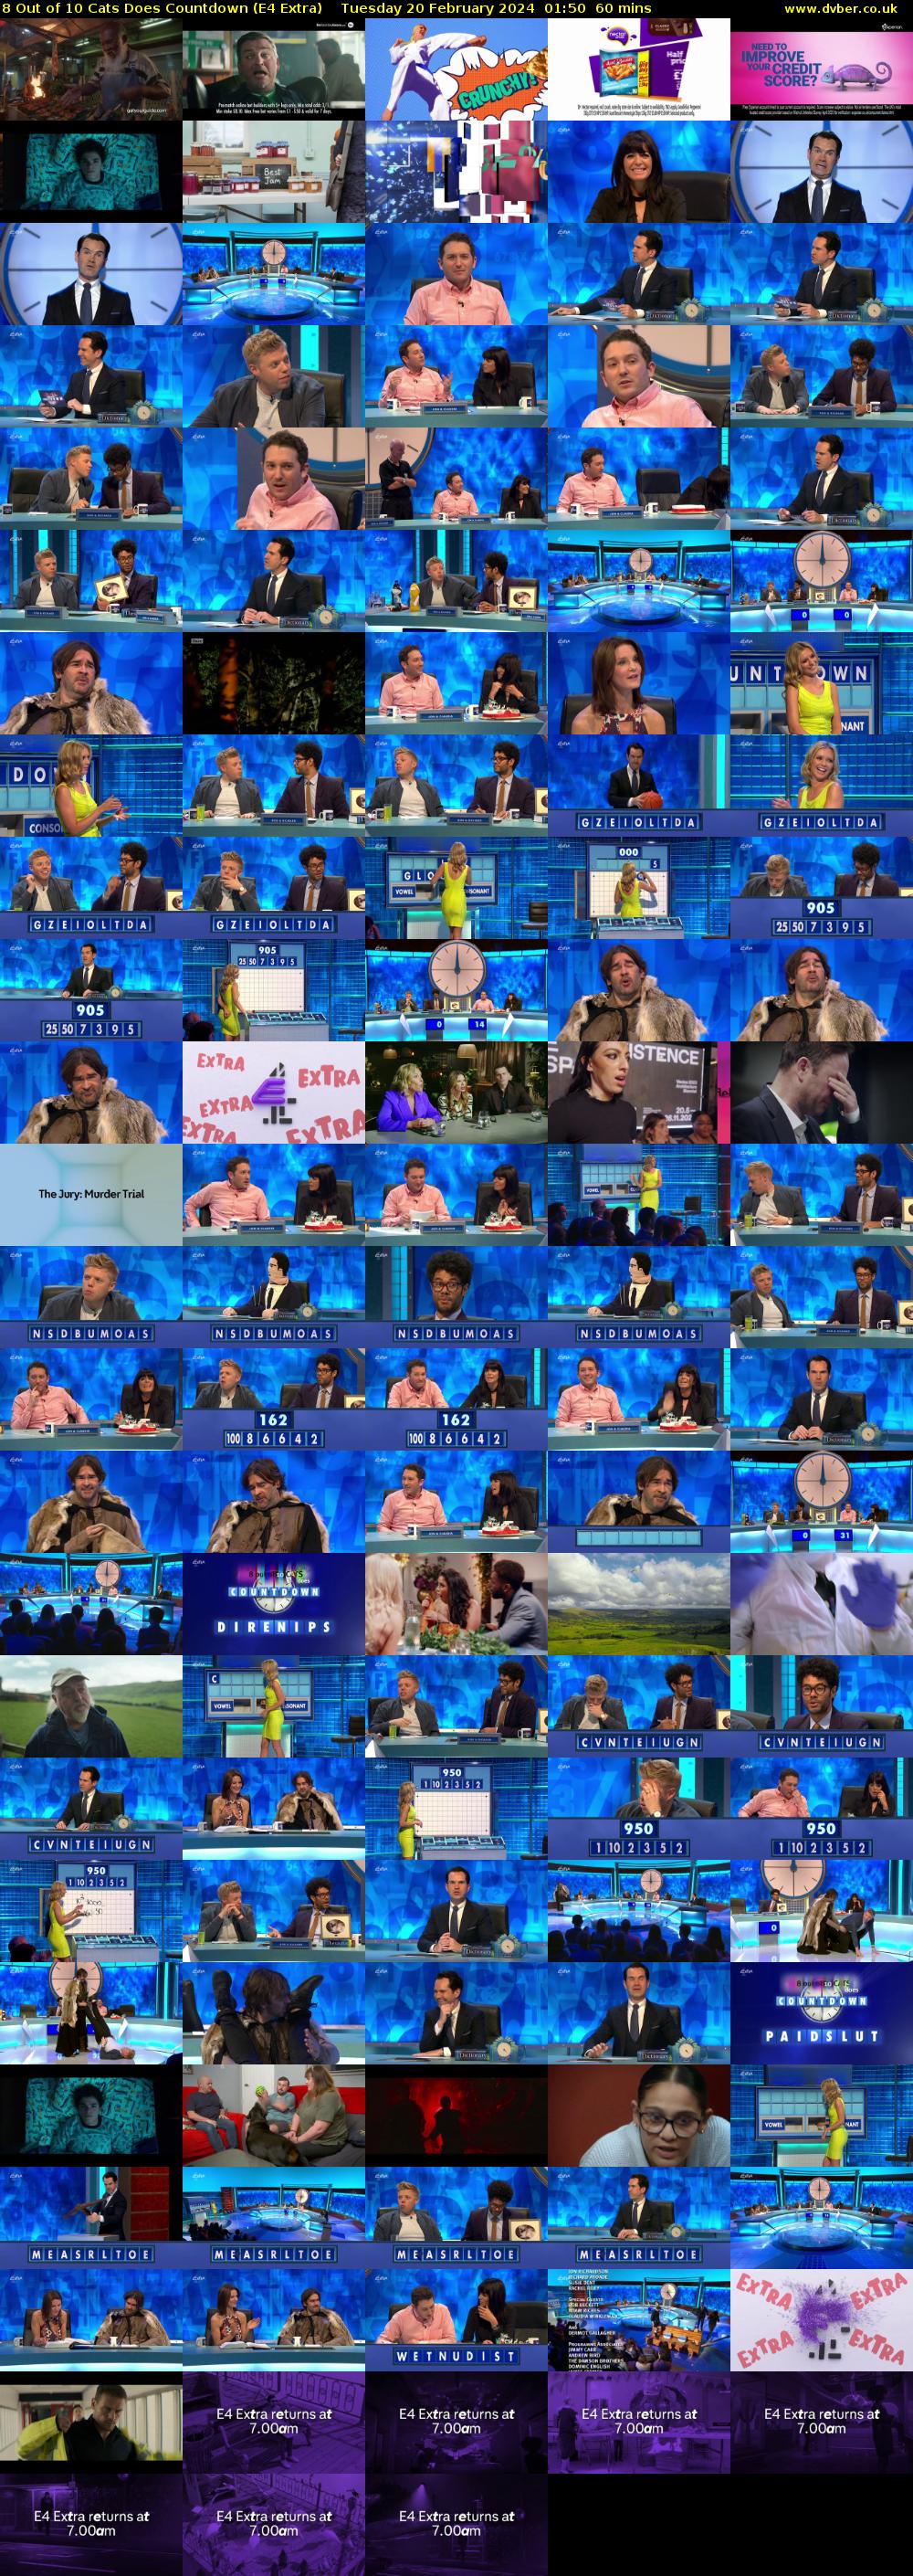 8 Out of 10 Cats Does Countdown (E4 Extra) Tuesday 20 February 2024 01:50 - 02:50